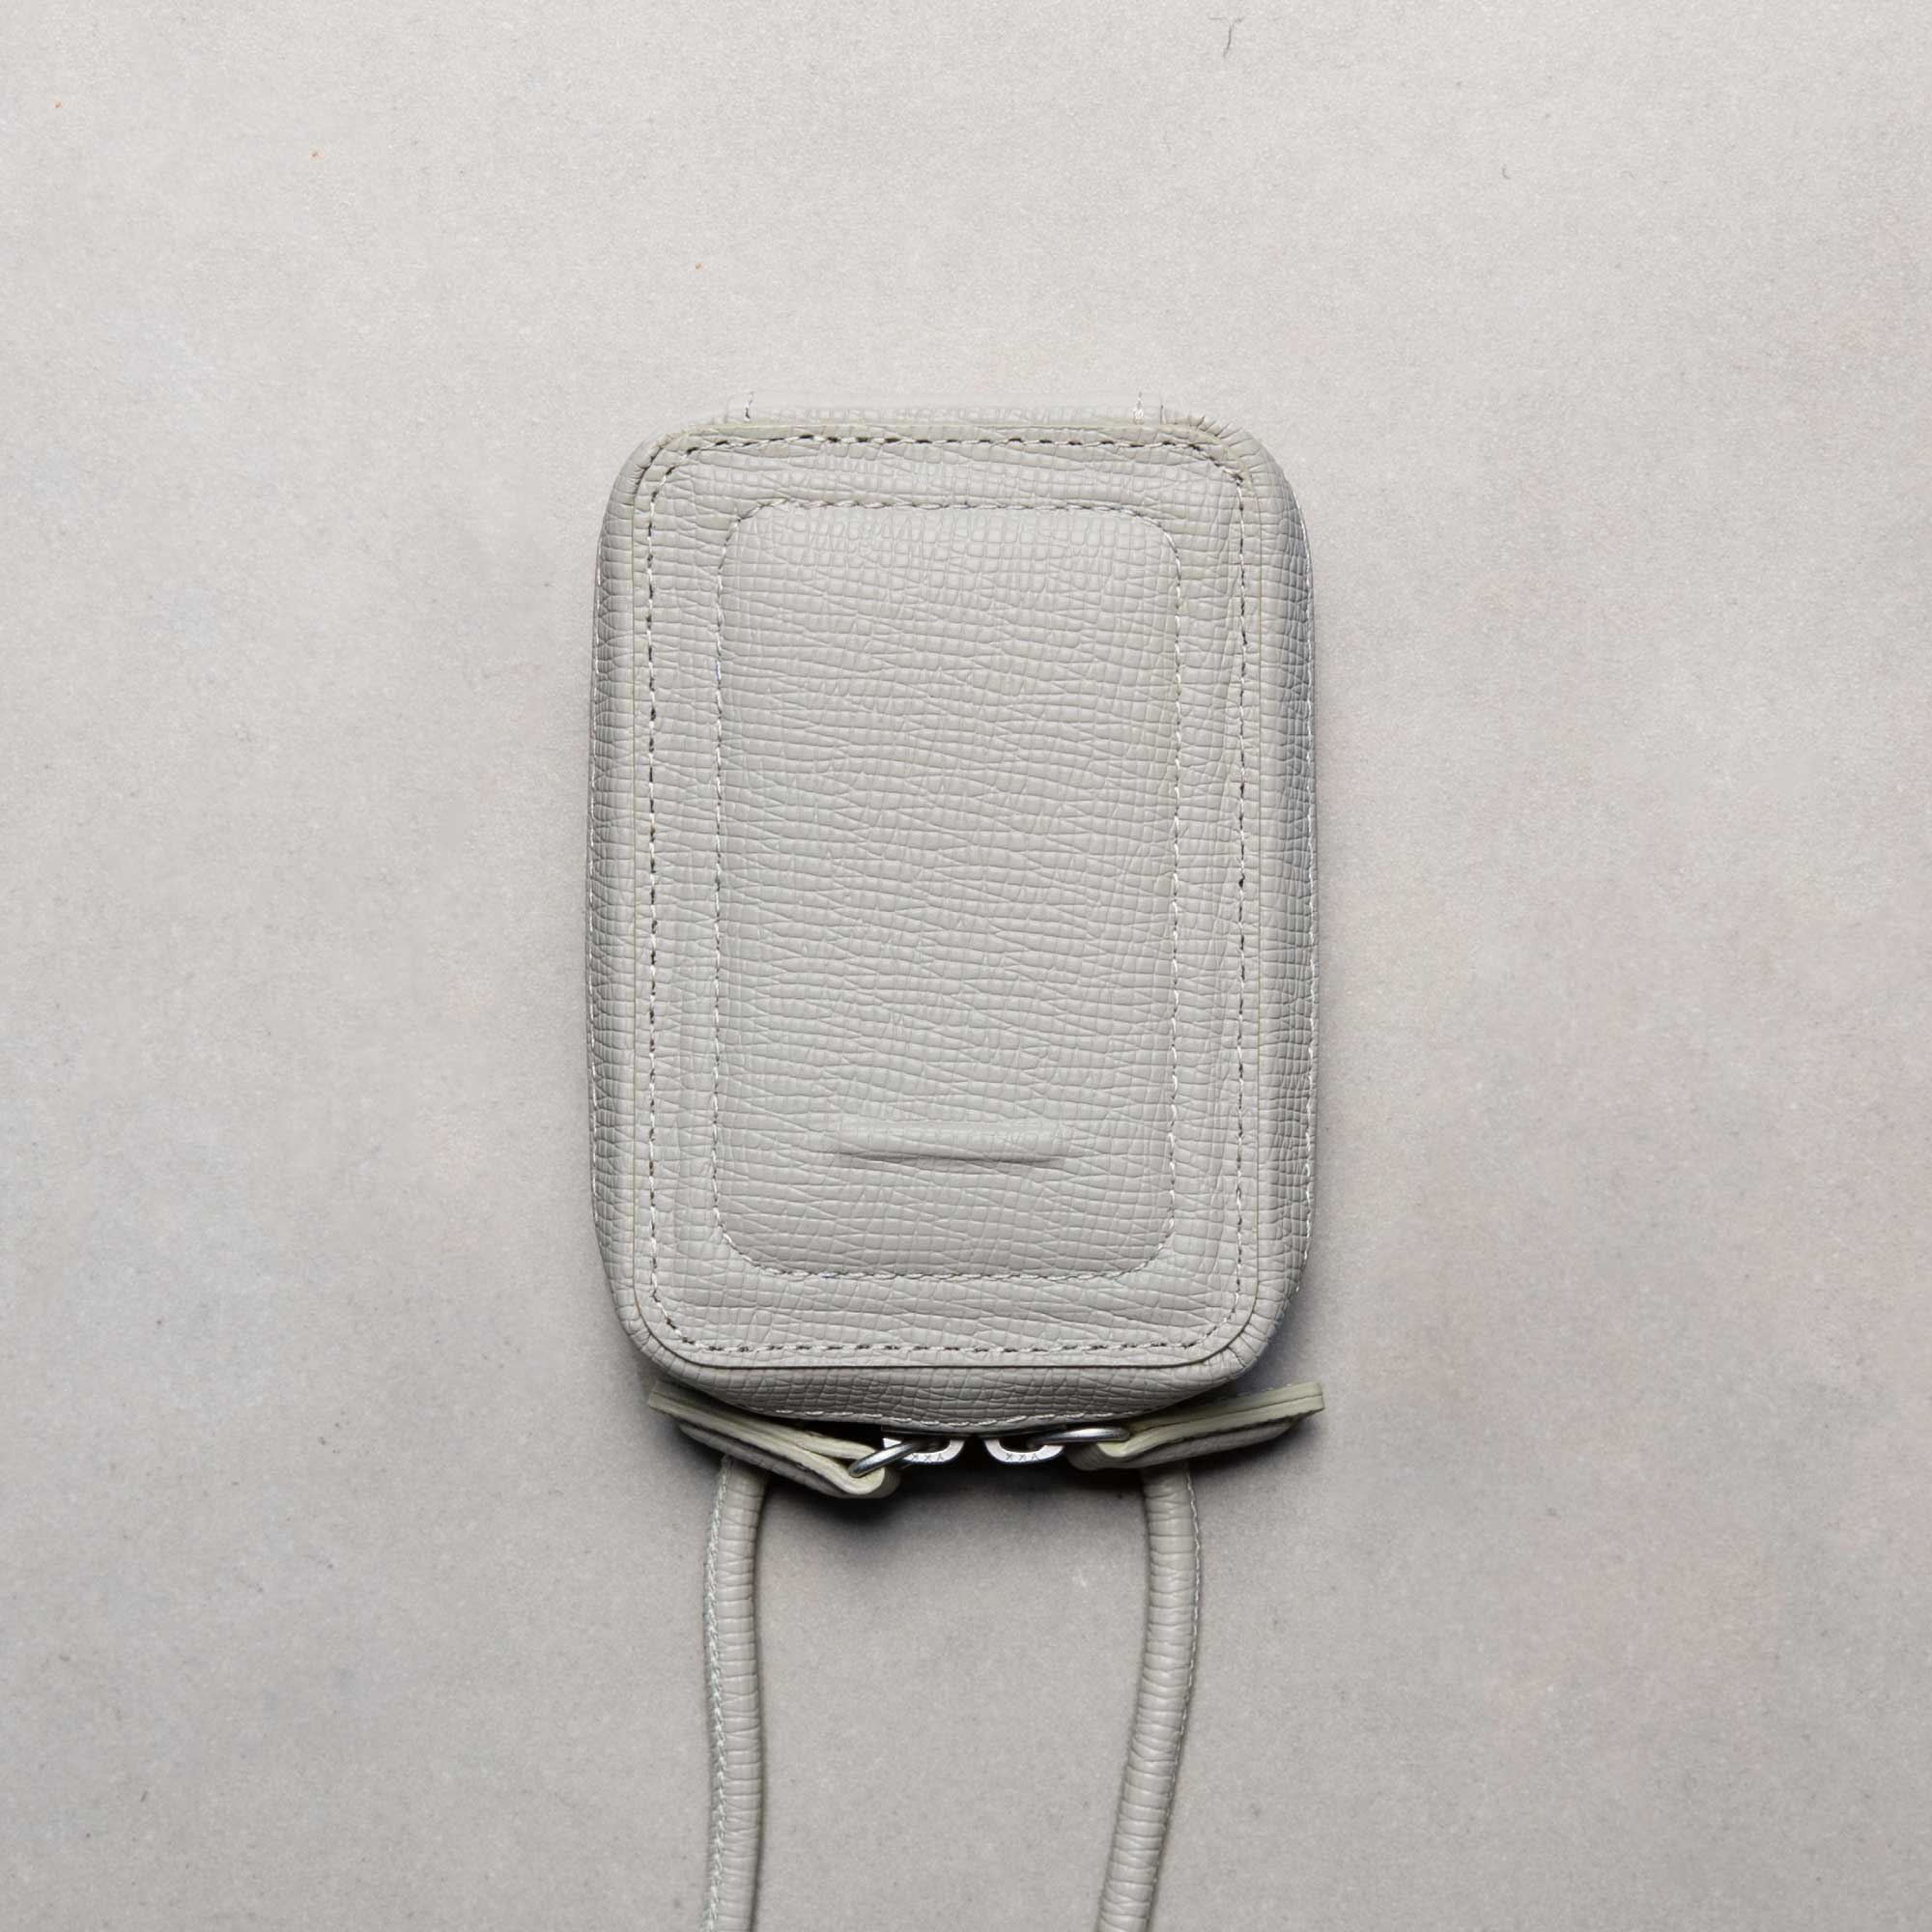 Strapped iPhone Accessory - White Beige